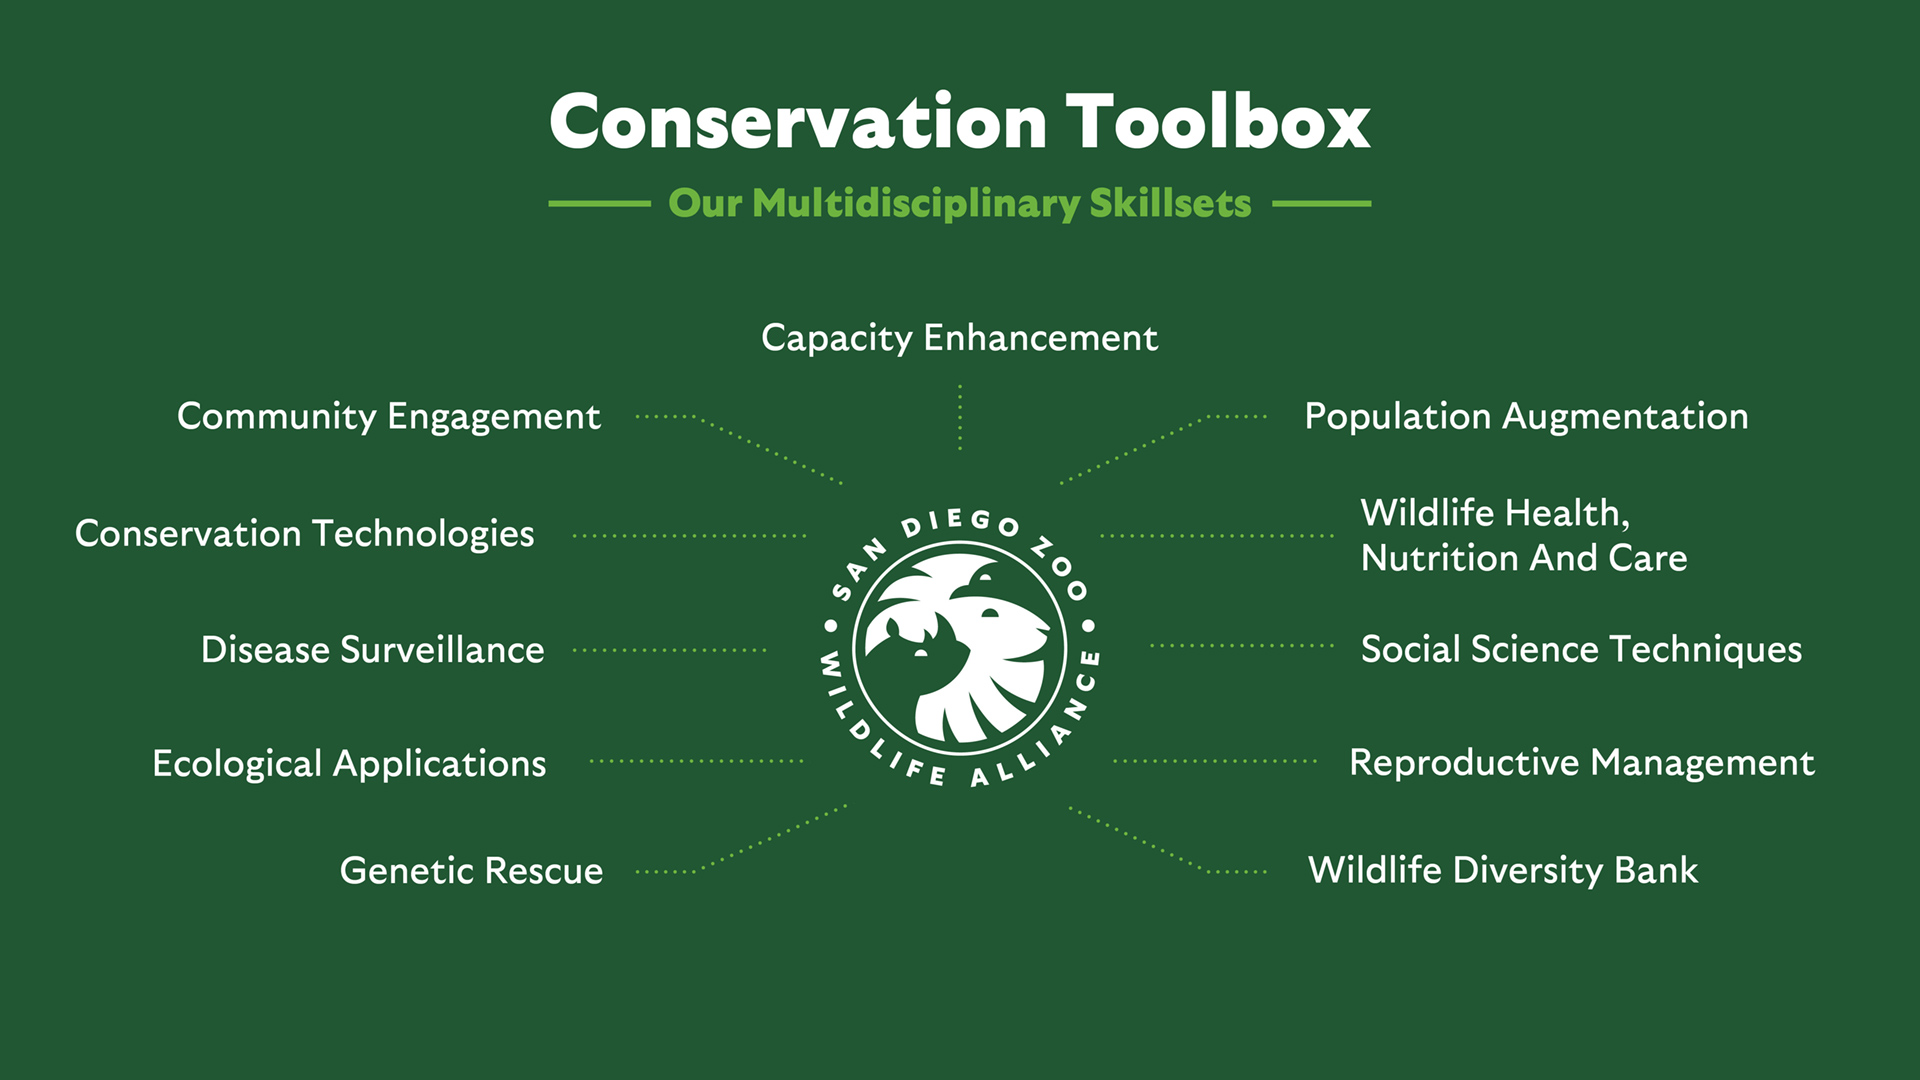 Our unique, innovative efforts include:  Capacity Enhancement Population Augmentation Wildlife Health, Nutrition and Care Wildlife Welfare Monitoring Social Science Techniques Reproductive Management Our Wildlife Biodiversity Bank Genetic Rescue Ecological Applications Disease Surveillance Conservation Technologies Community Engagement